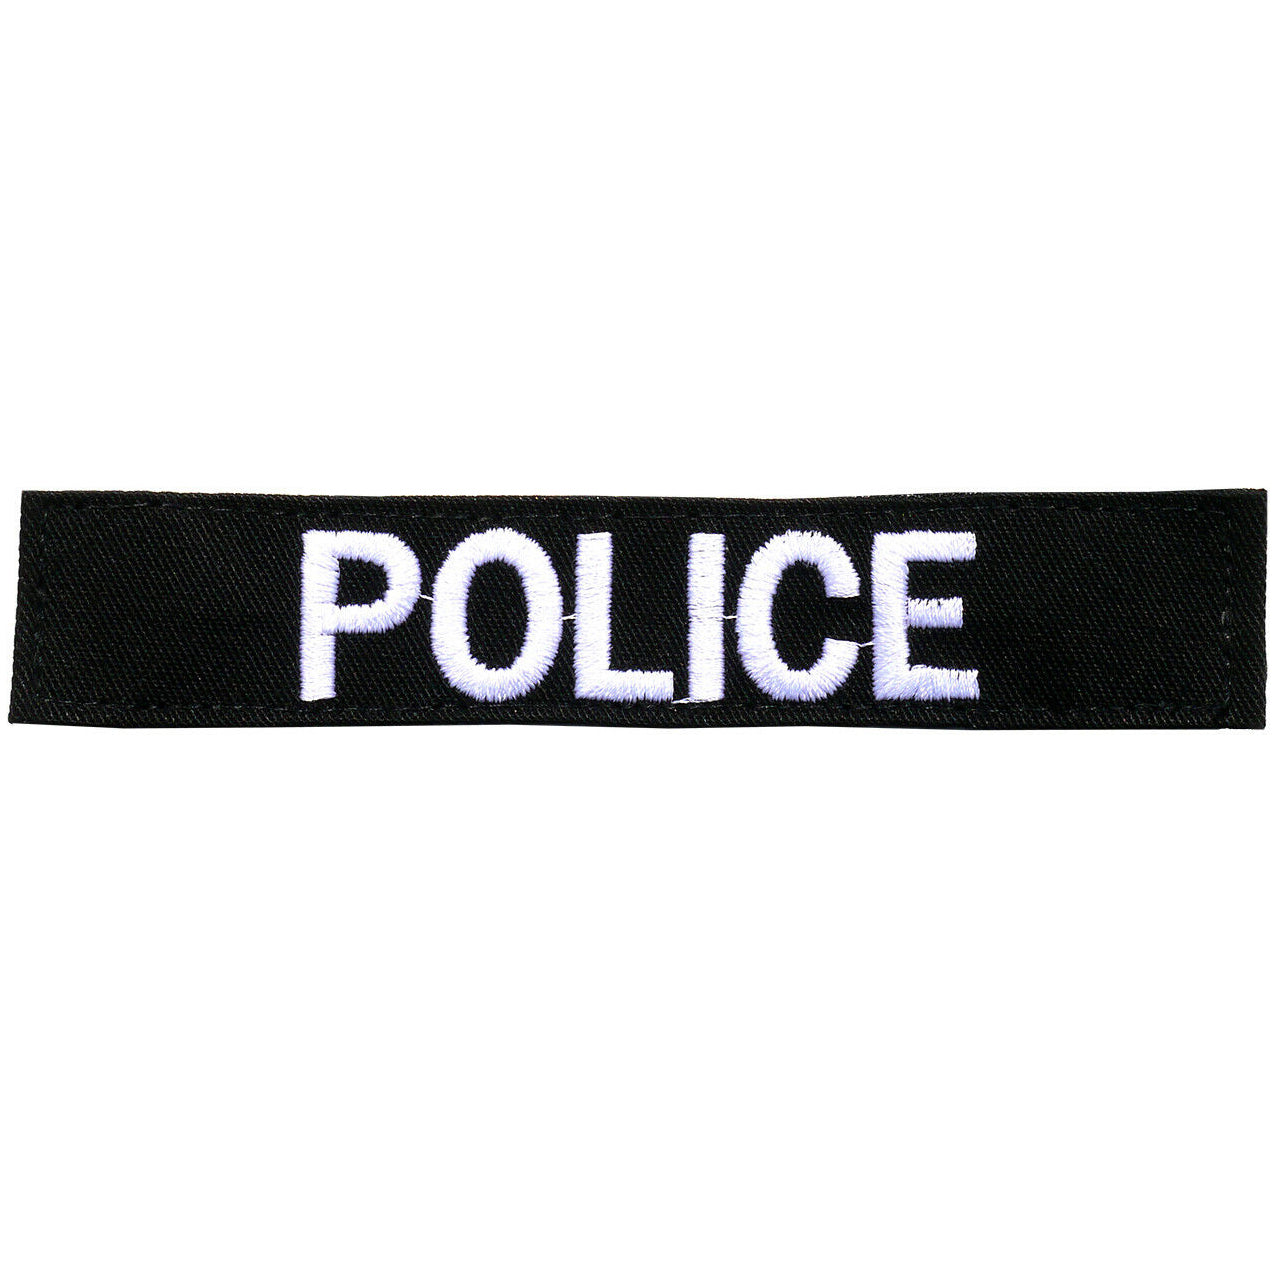 Name tag in black material, size is 2.5cm x 15cm, lettering is 1.5cm in height.  All embroidery is done in upper case letters only as a FYI.  These are great for cadets, police and other public service departments.  Don't forget you can even add the velcro backing and use them on your field gear or even dog vests. www.defenceqstore.com.au